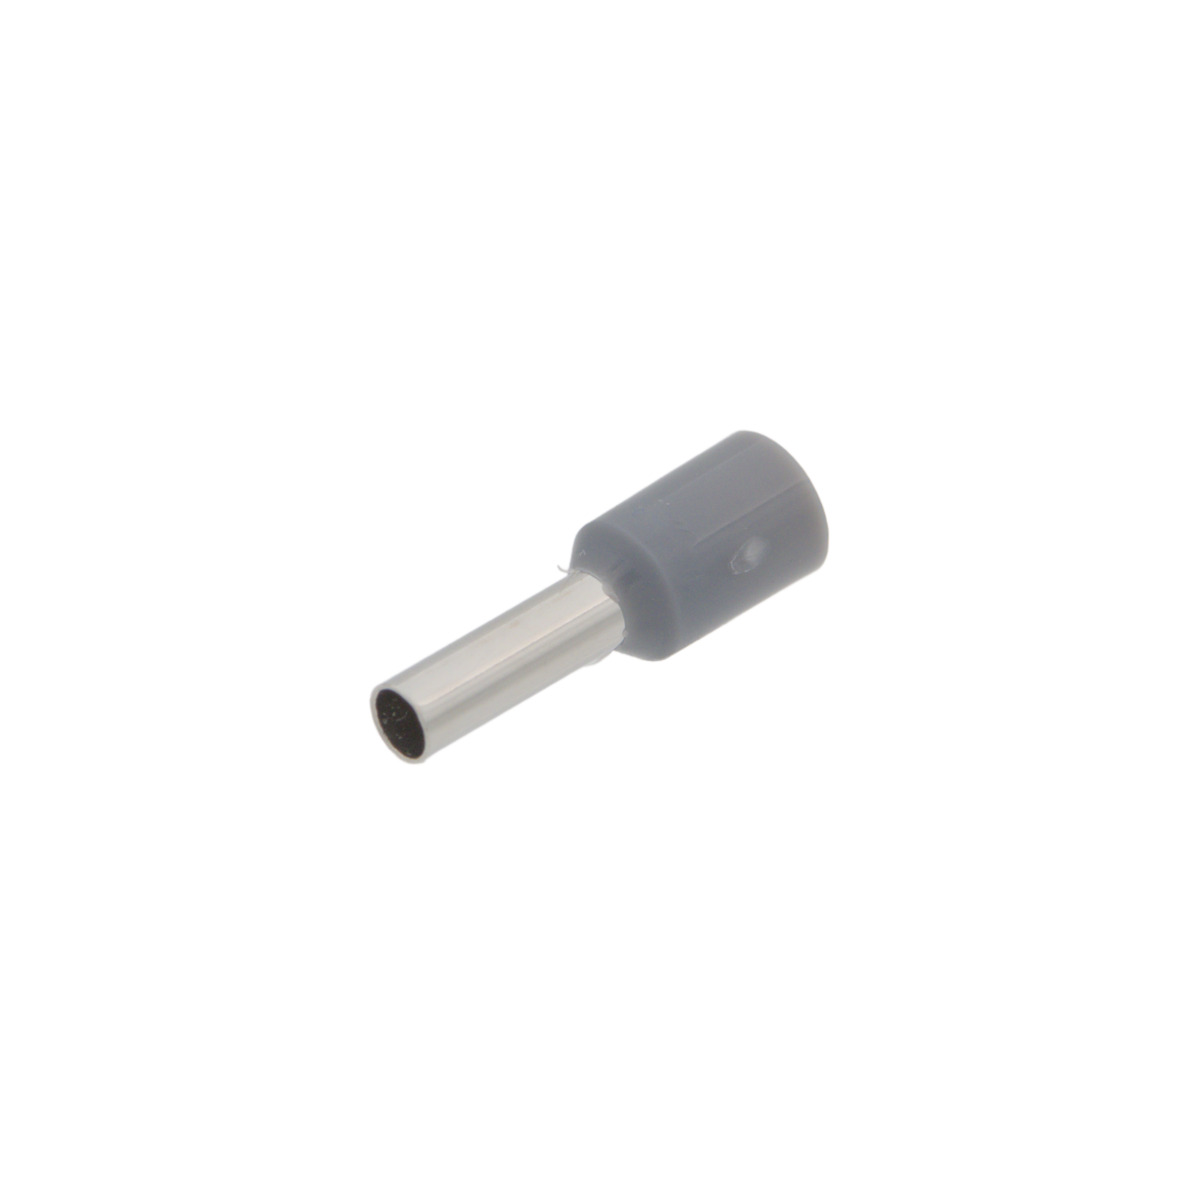 Insulated ferrule for 2.50mm² [AWG 14] cable